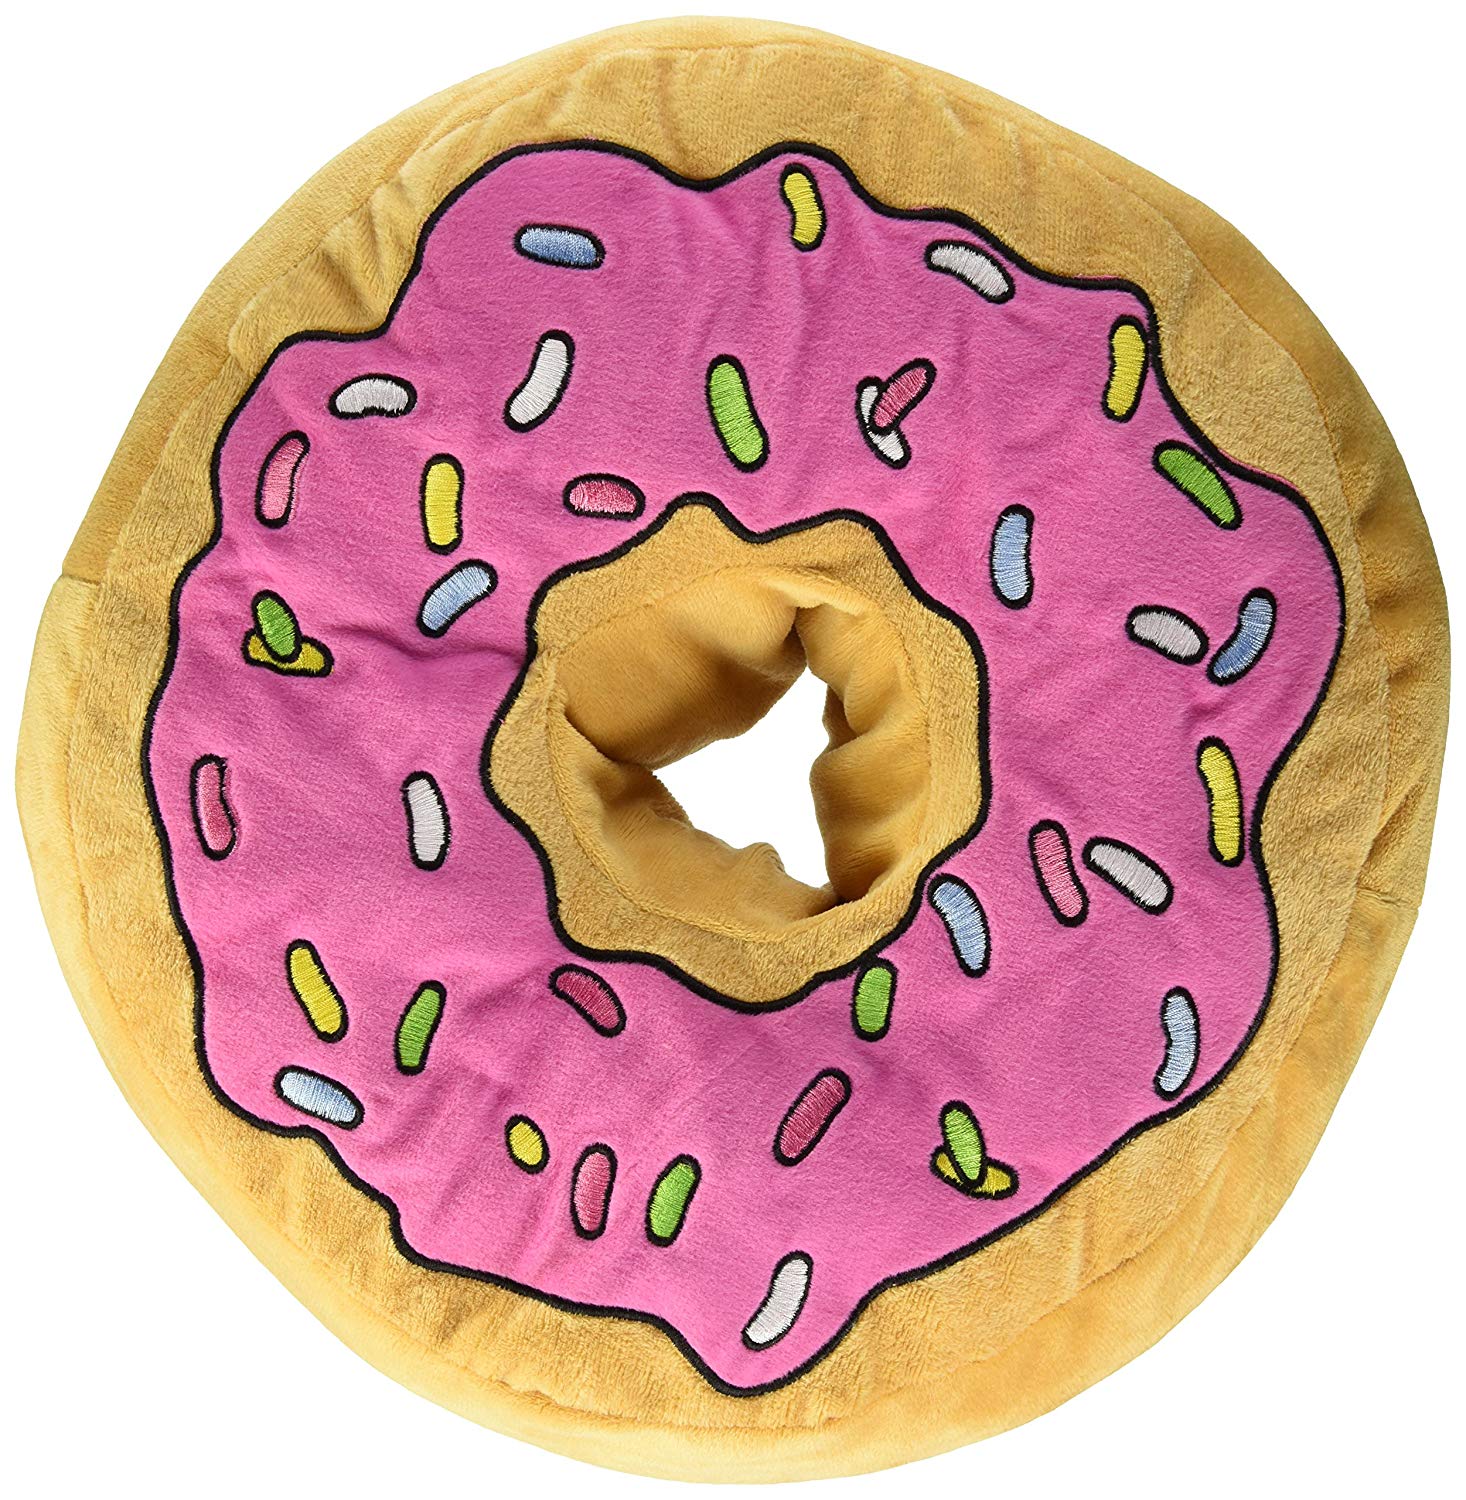 SIMPSONS Coussin Donut